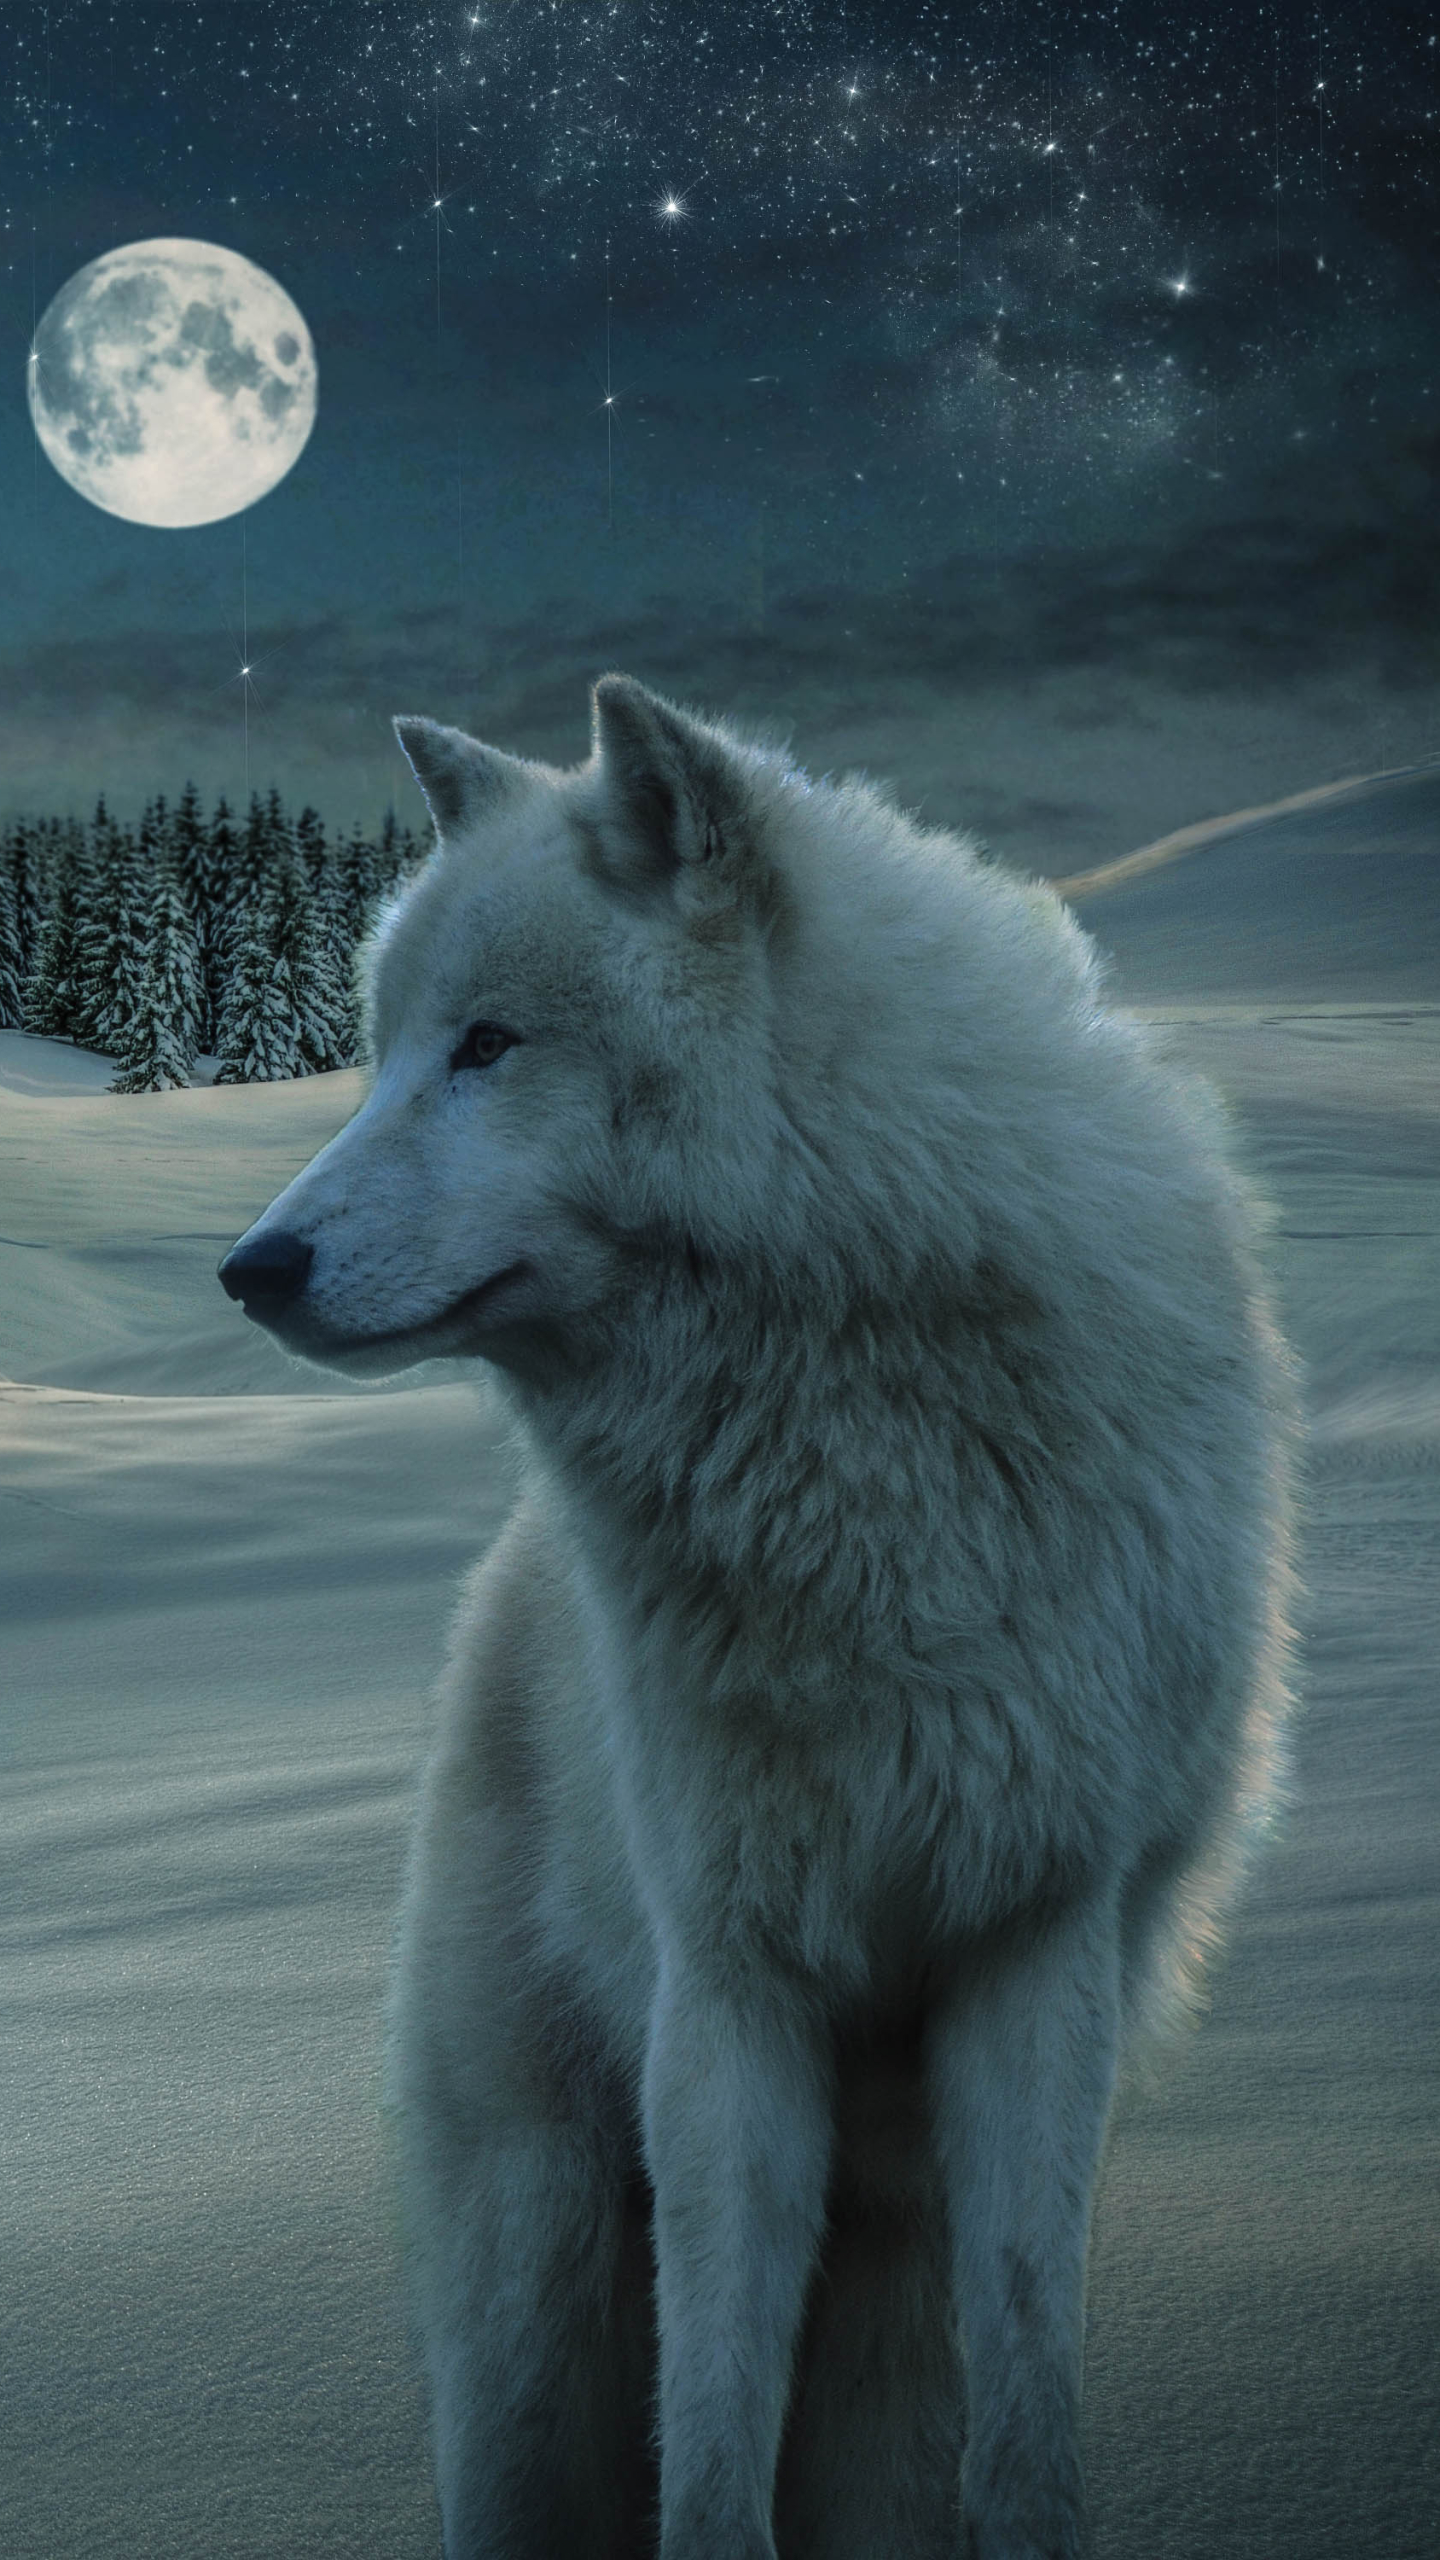 wolf, starry sky, white wolf, animal, snow, moon, winter, night, stars, house, wolves